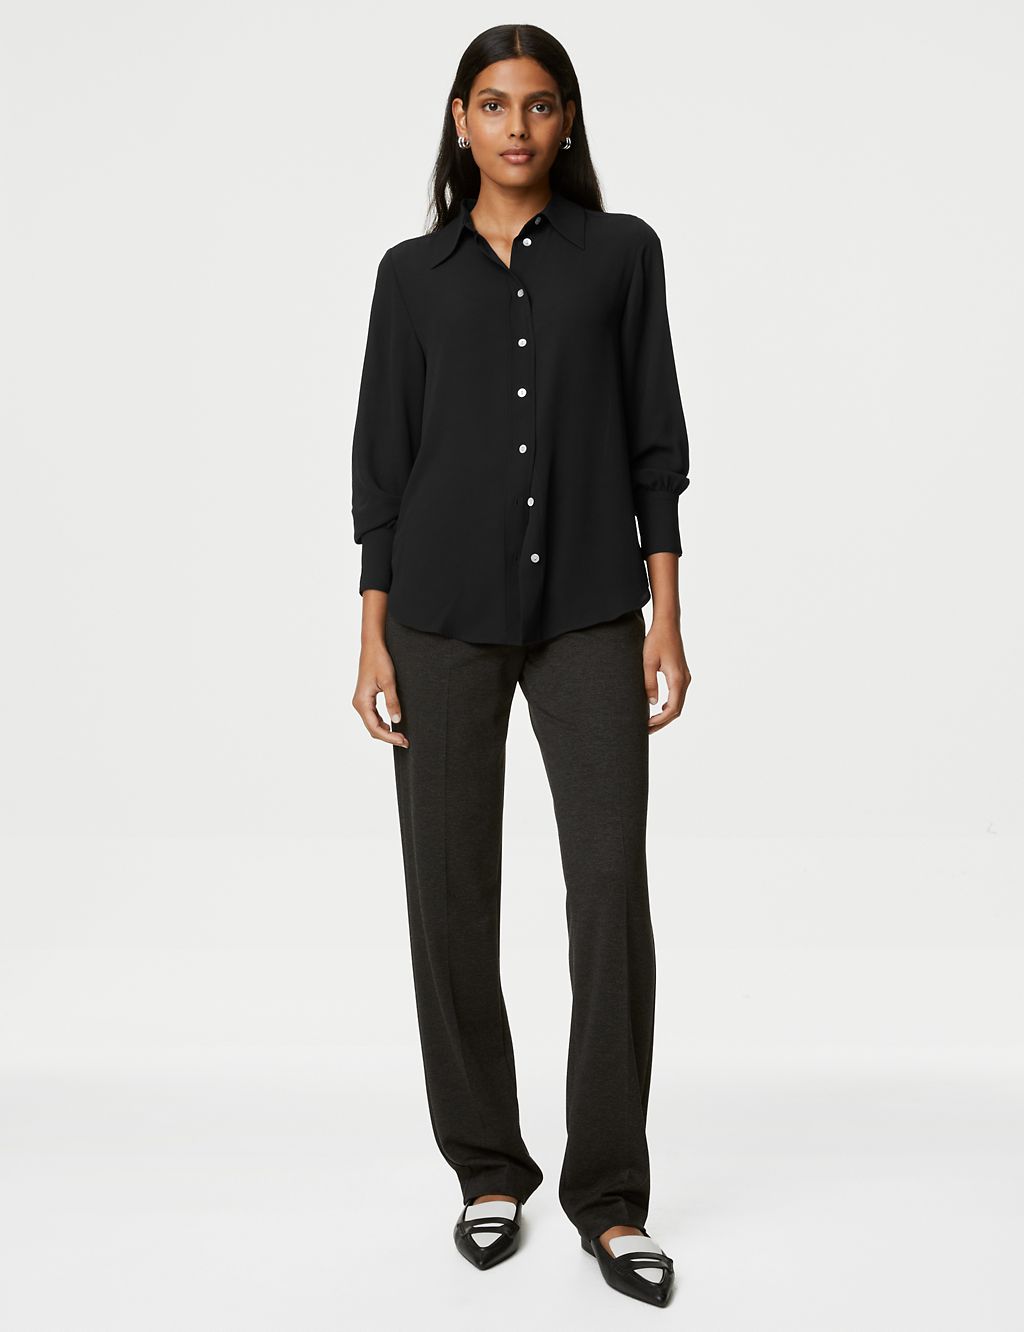 Collared Long Sleeve Shirt | M&S Collection | M&S